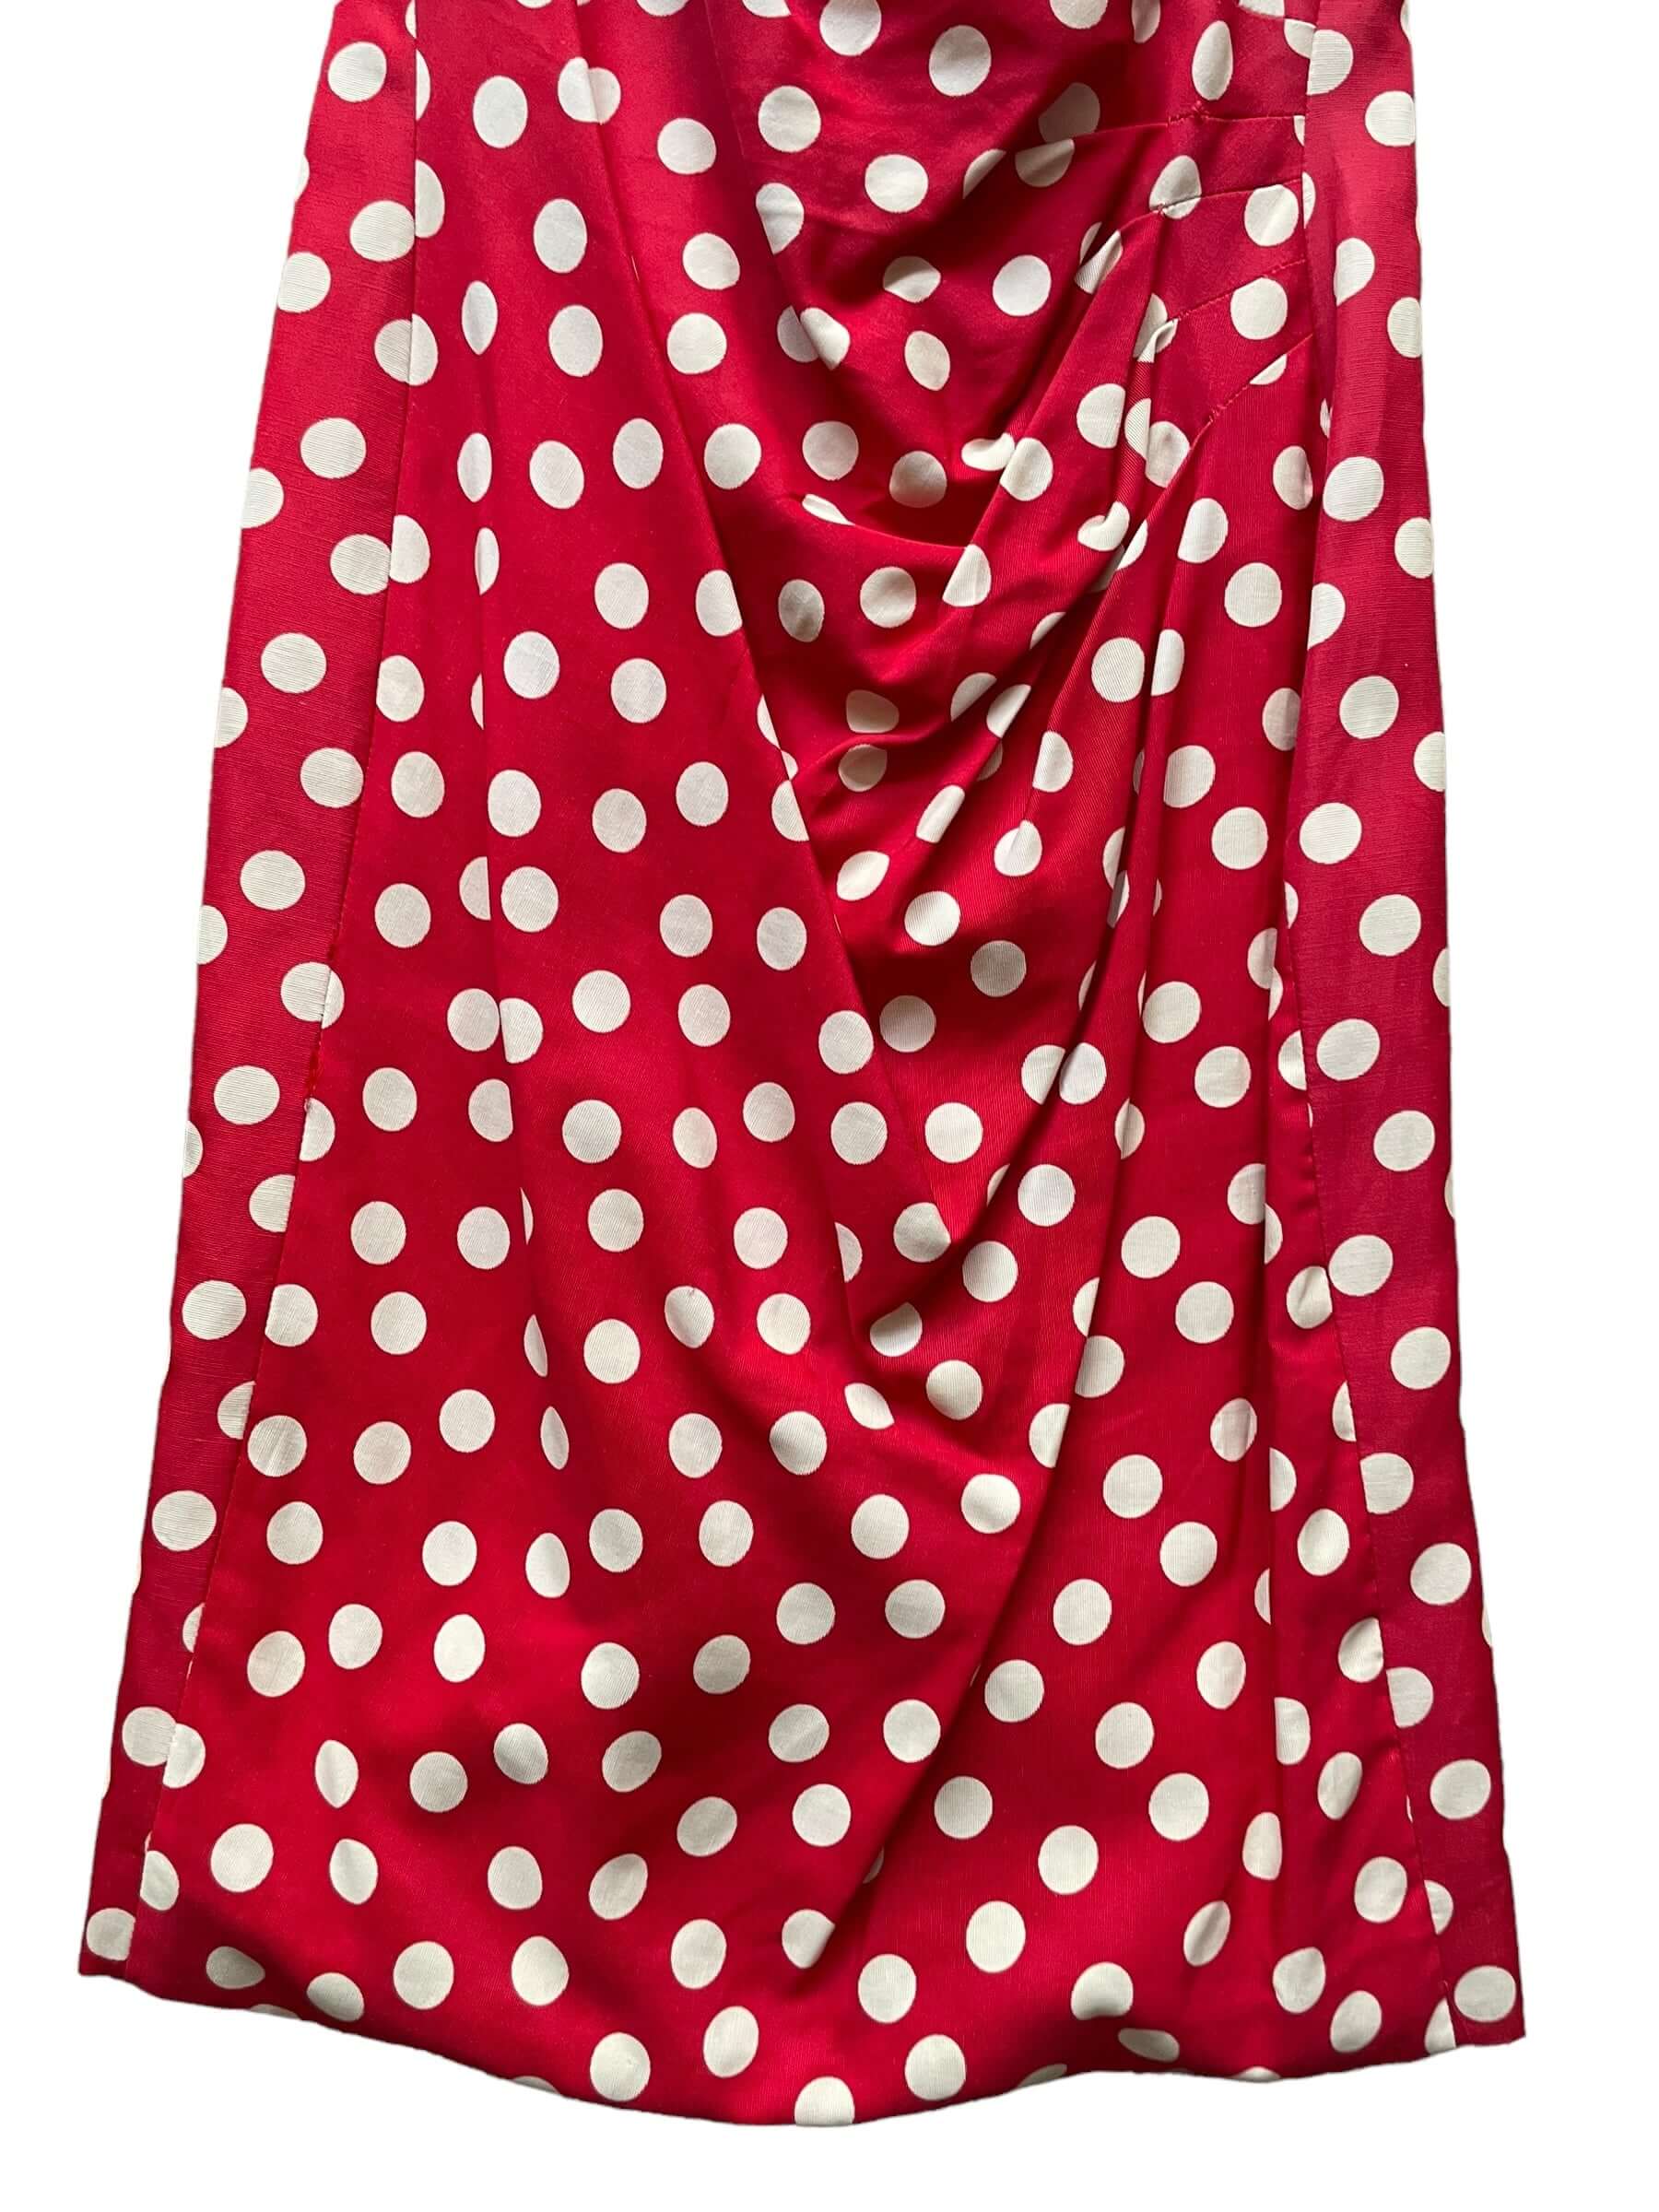 Front skirt view of 1980s Poofy Red Polka Dot Wiggle Dress M-L